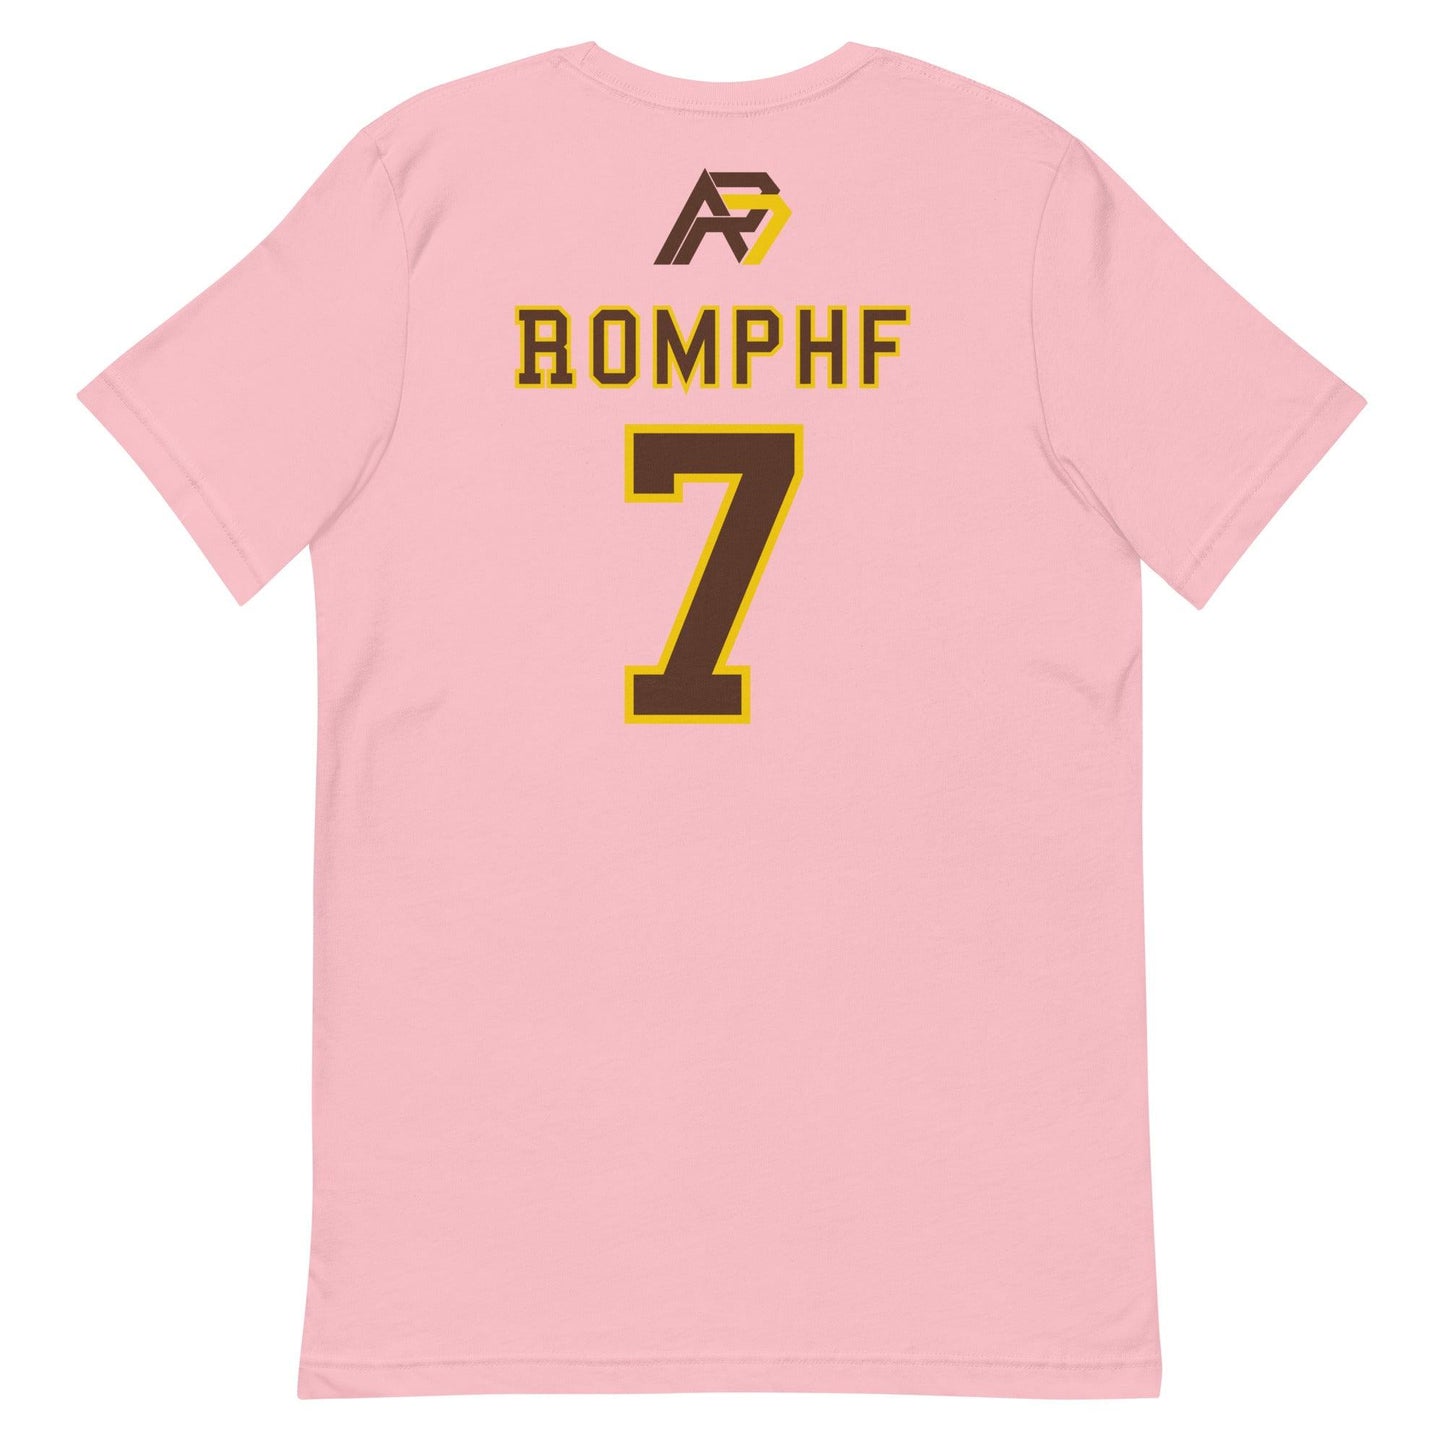 Anthony Romphf "Jersey" t-shirt - Fan Arch